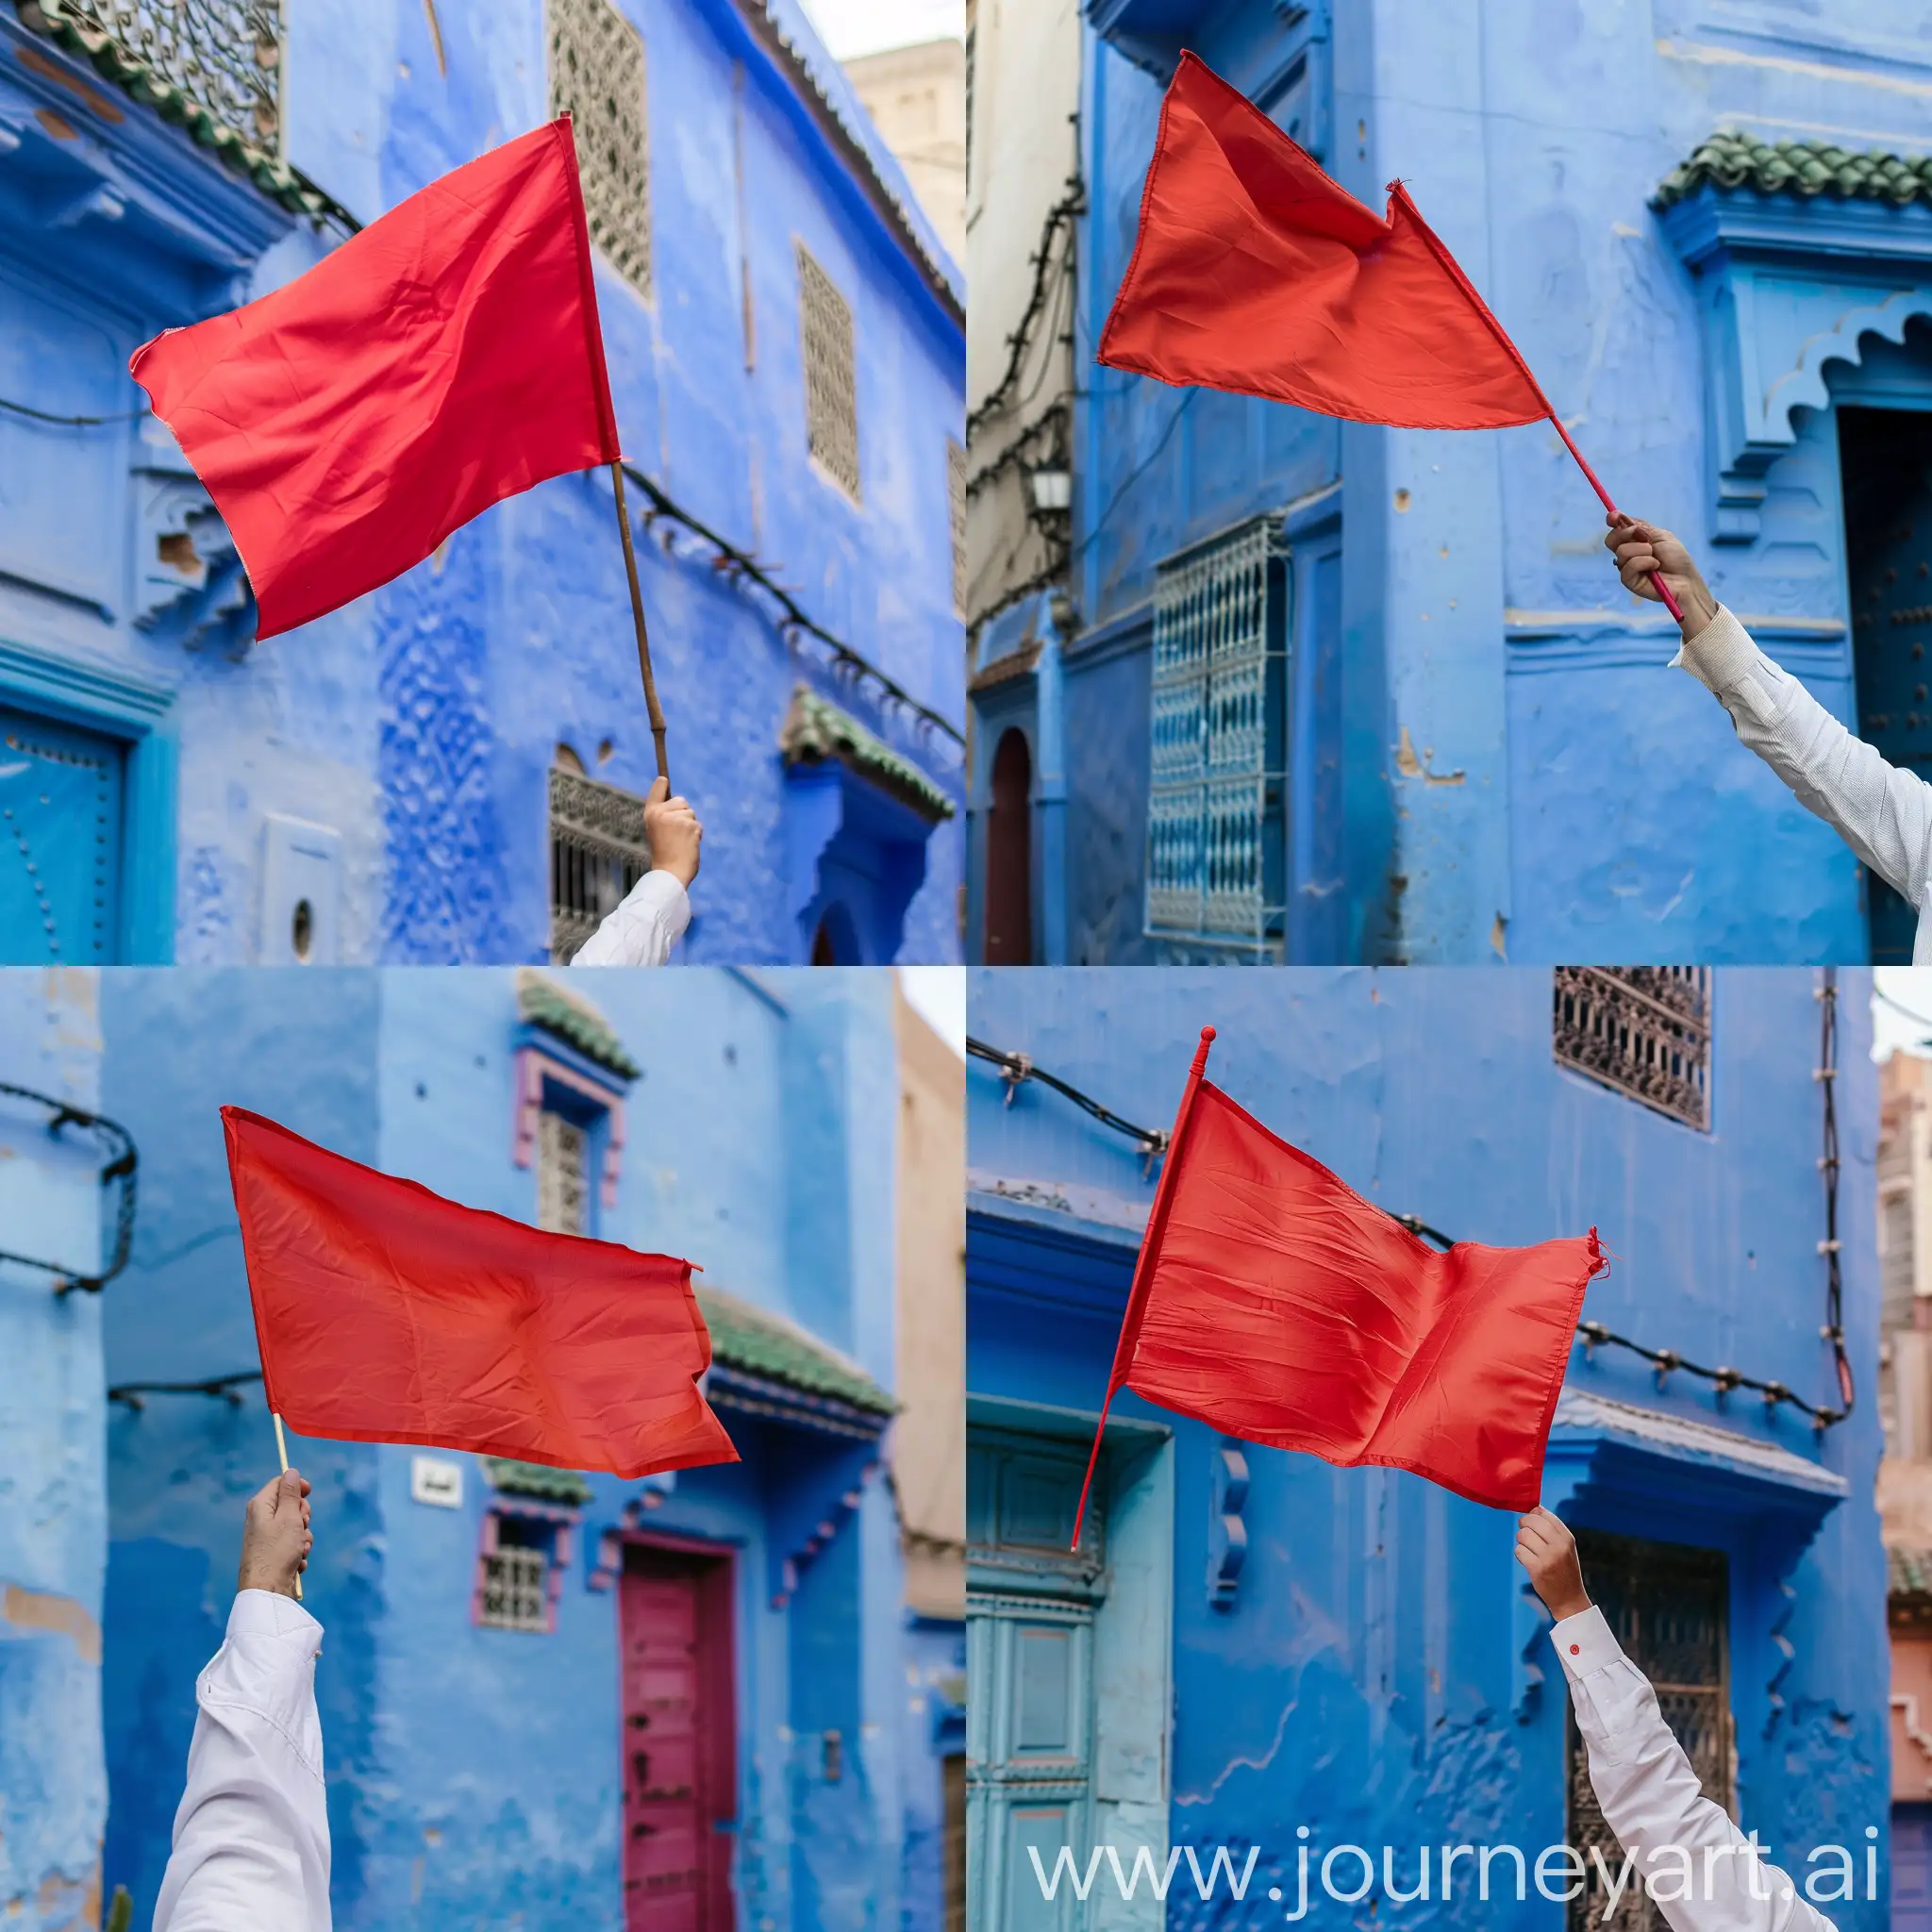 Person-in-White-Shirt-Waving-Red-Flag-Against-Blue-Building-in-Morocco